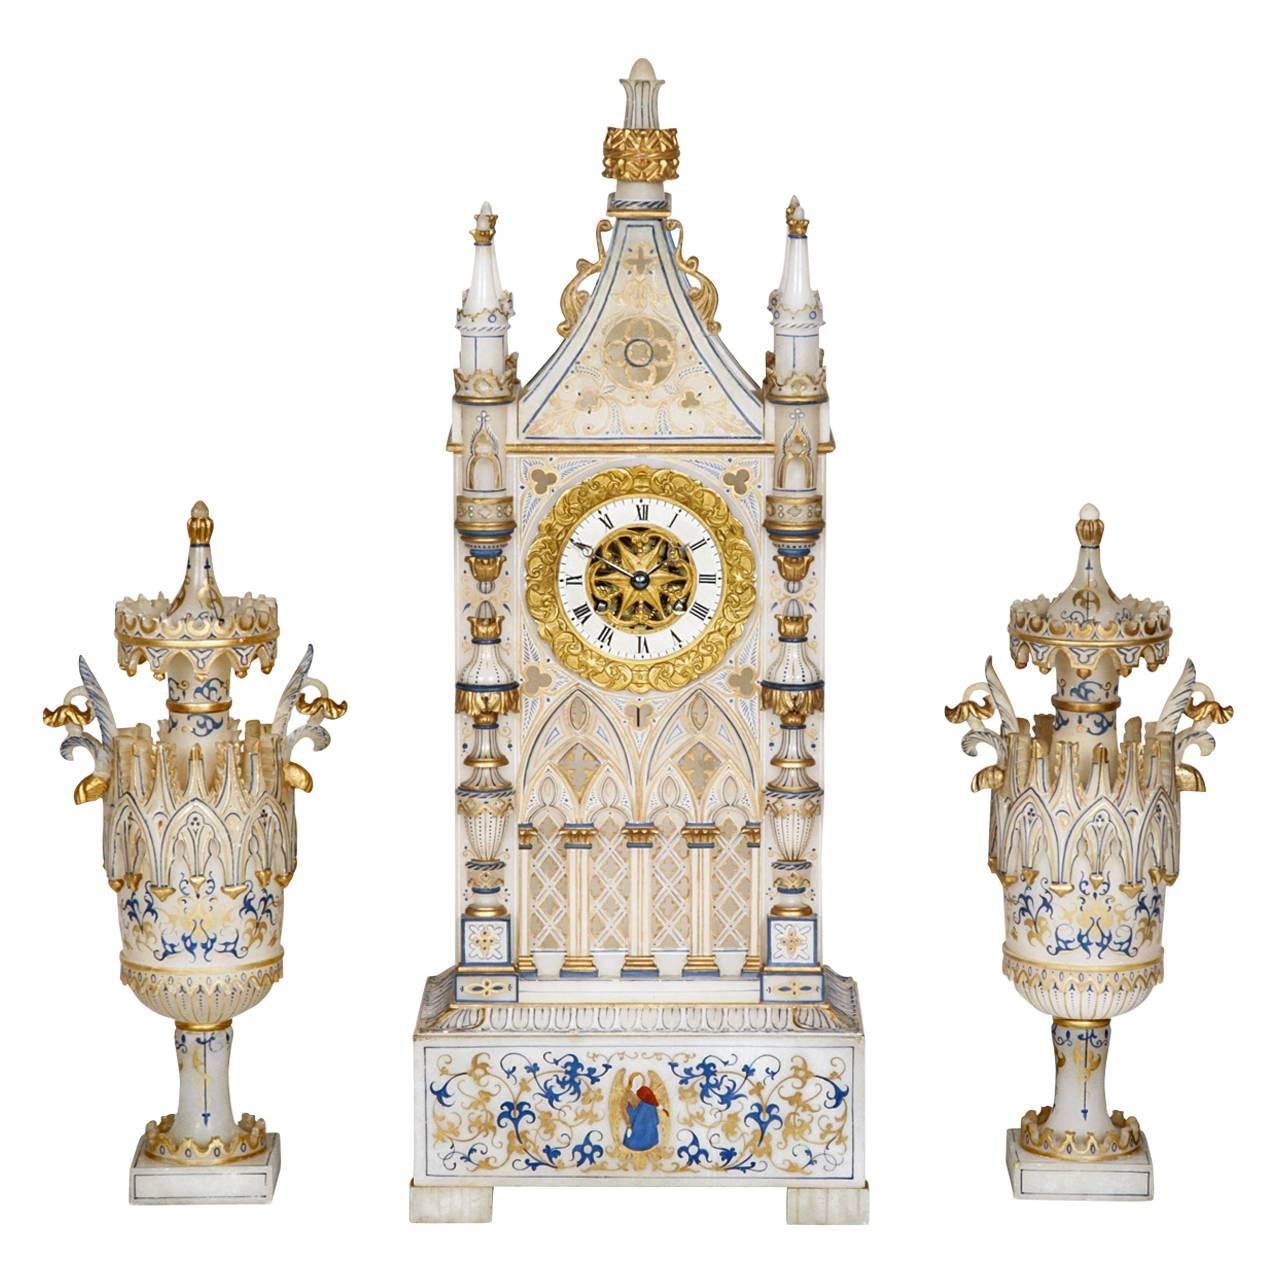 Three Piece Alabaster Clock Garniture in the Form of a Neo-Gothic Cathedral